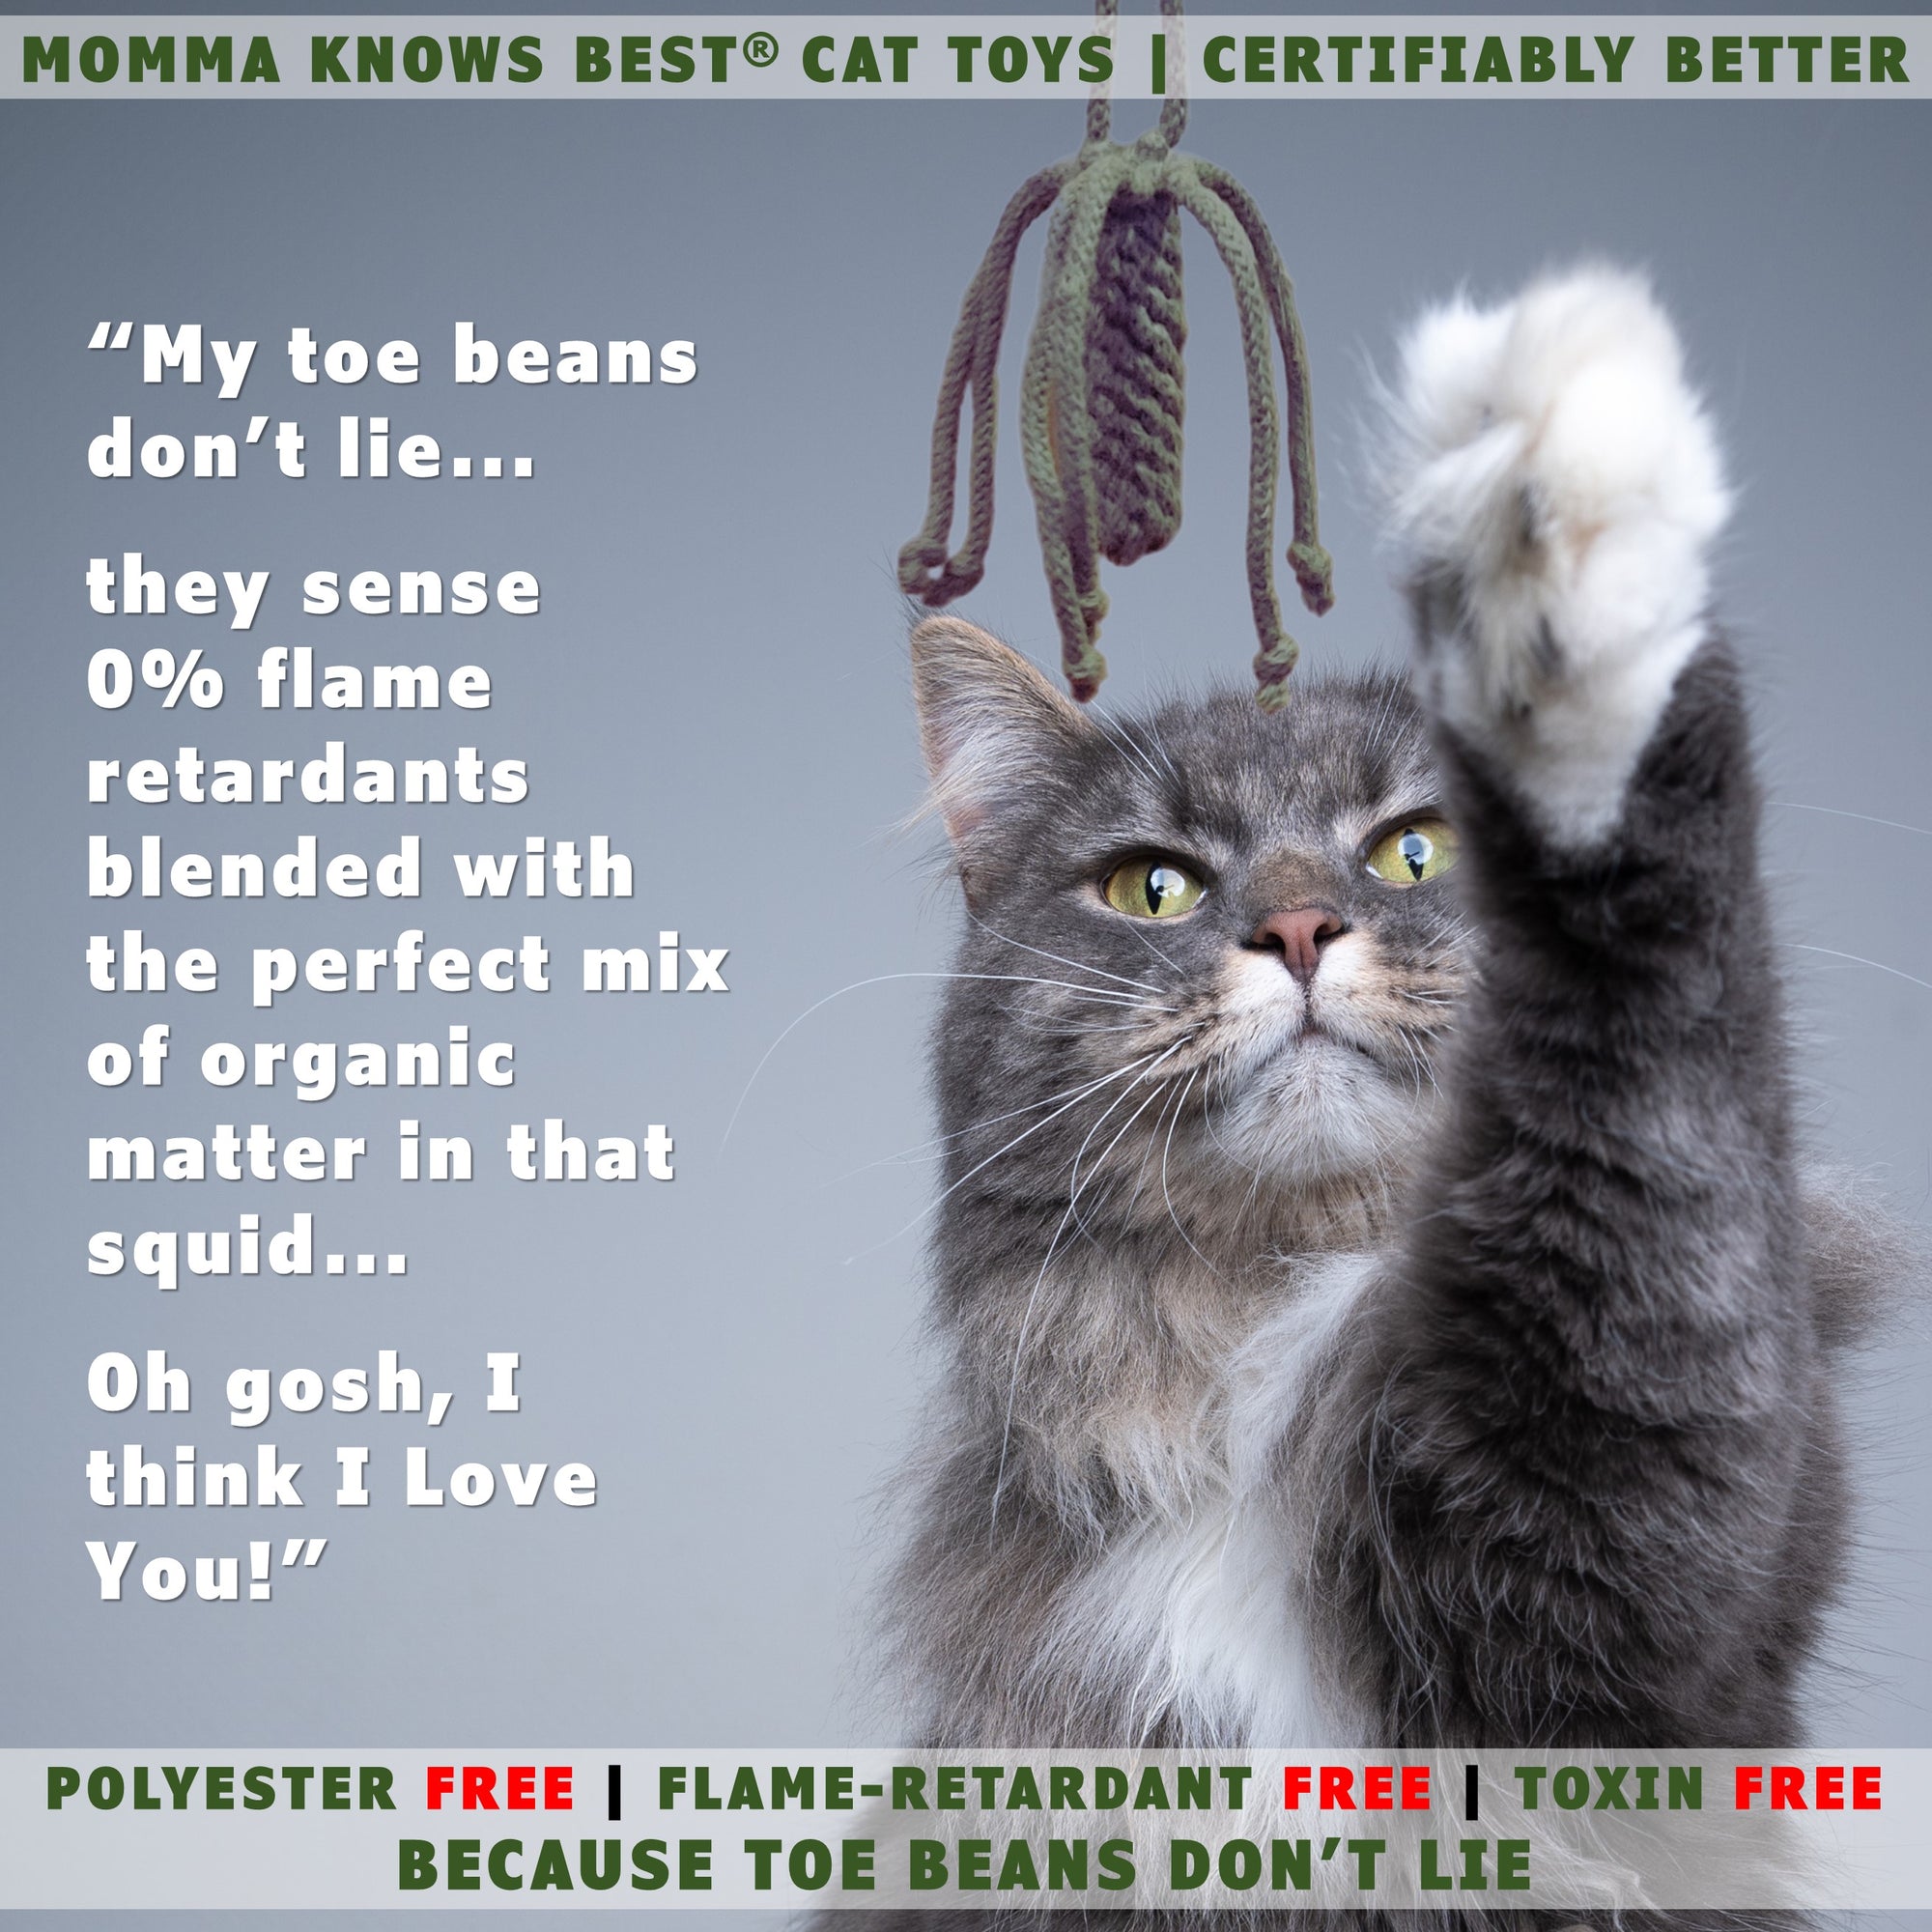 Organic cat toys made in the USA by Momma knows best